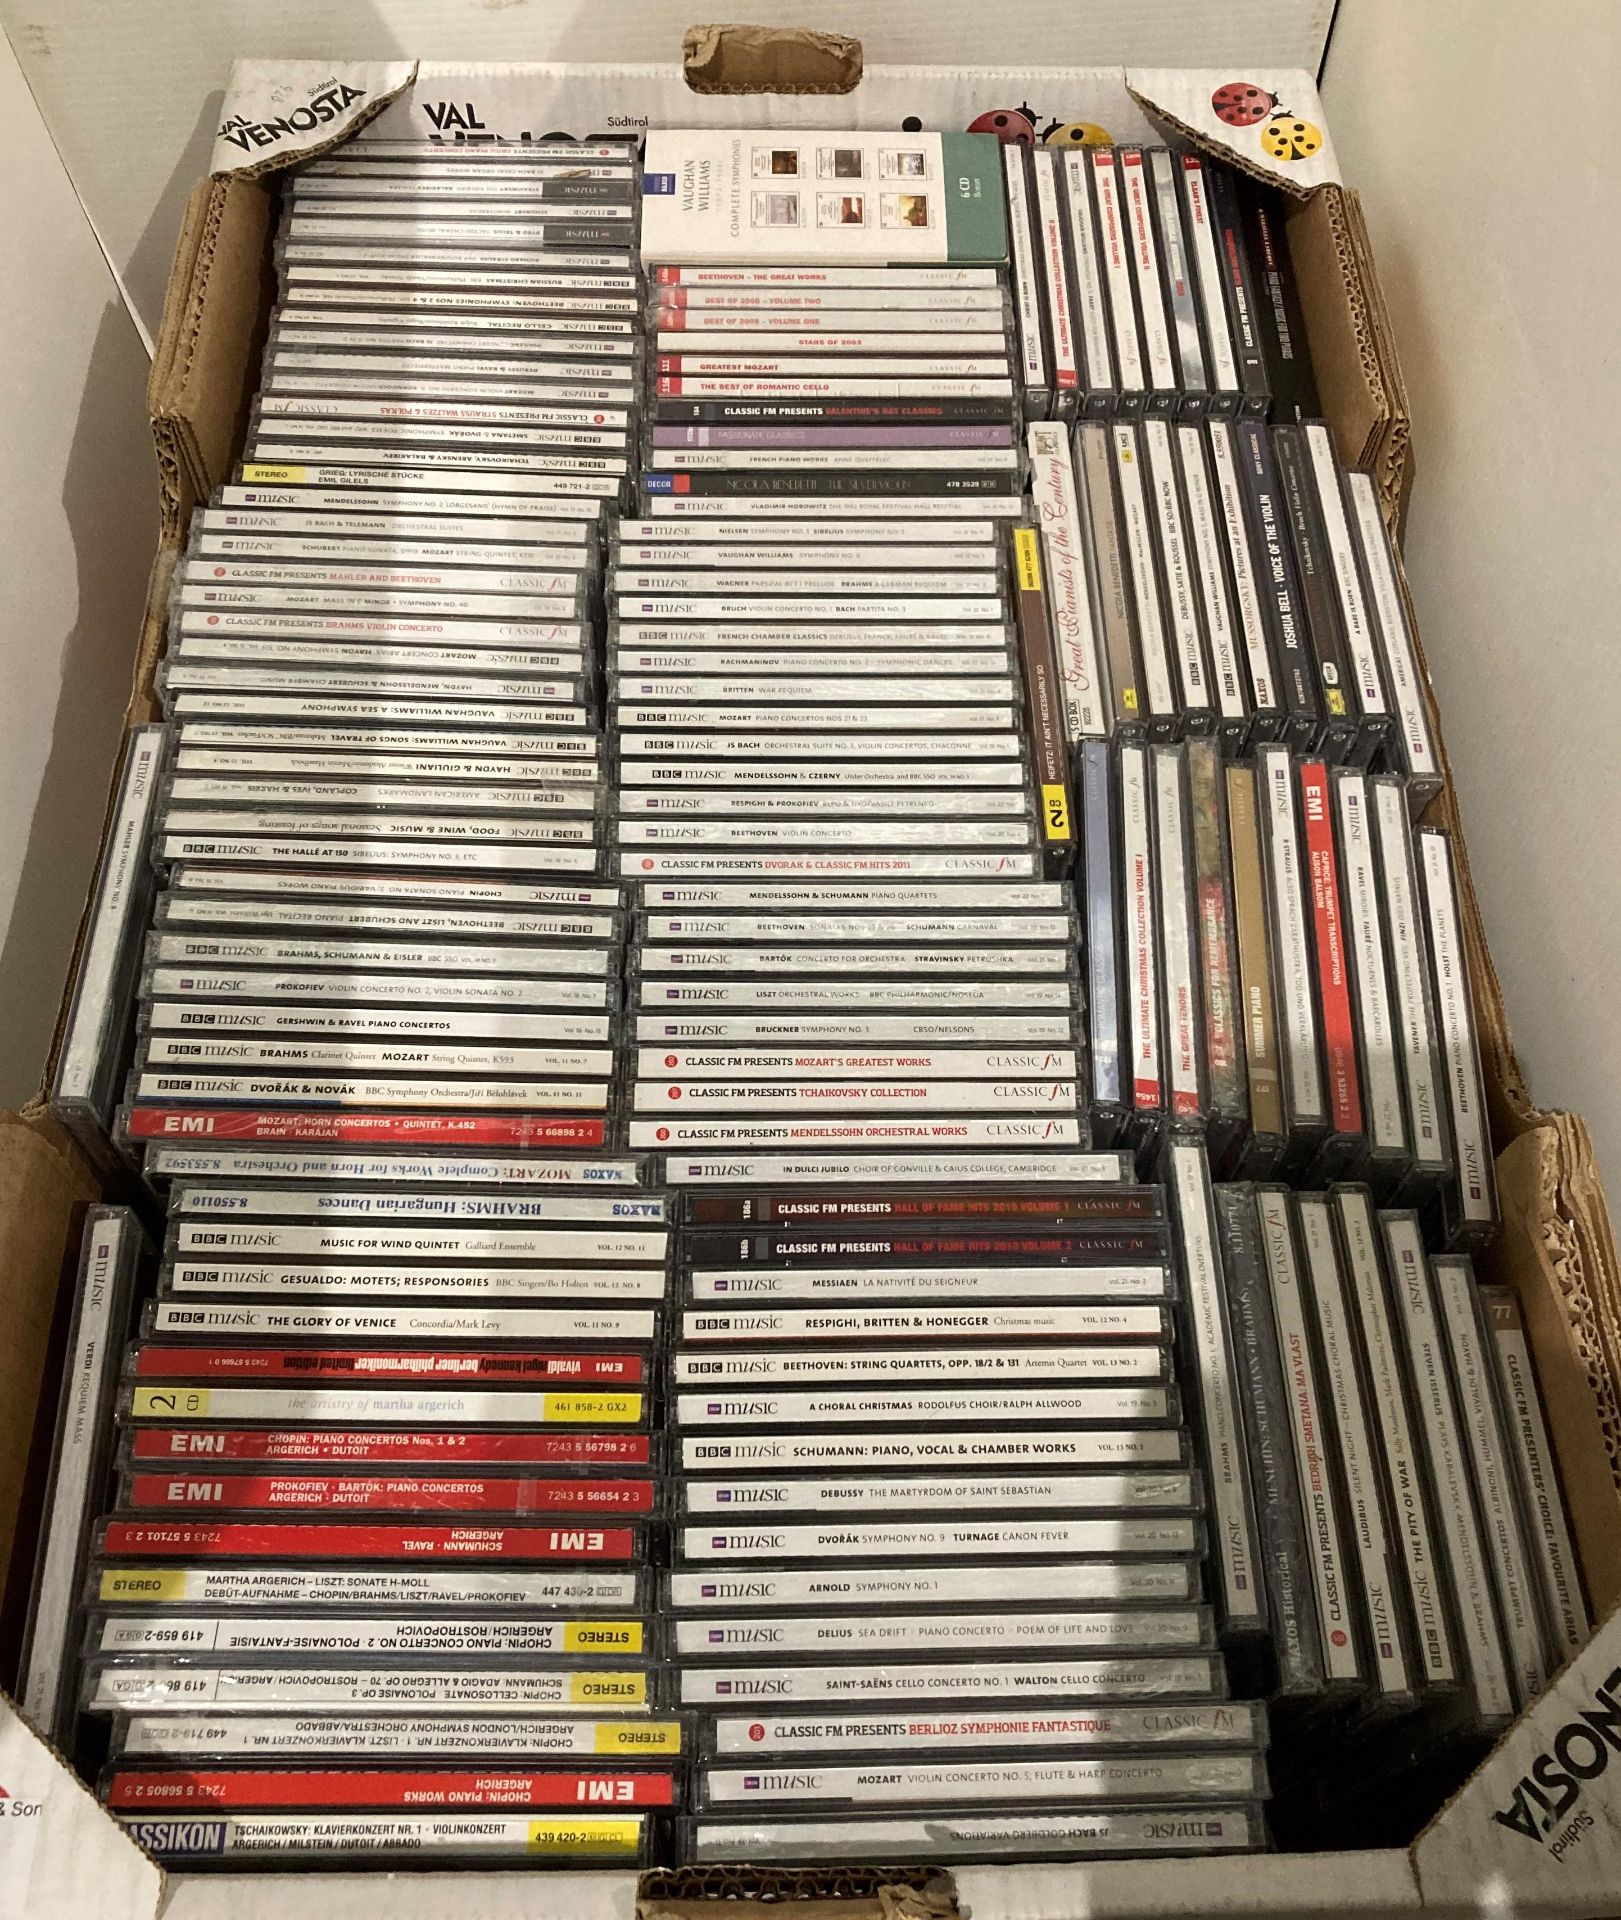 Contents to crate - approximately 140 assorted classical music CDs (mainly BBC music) including